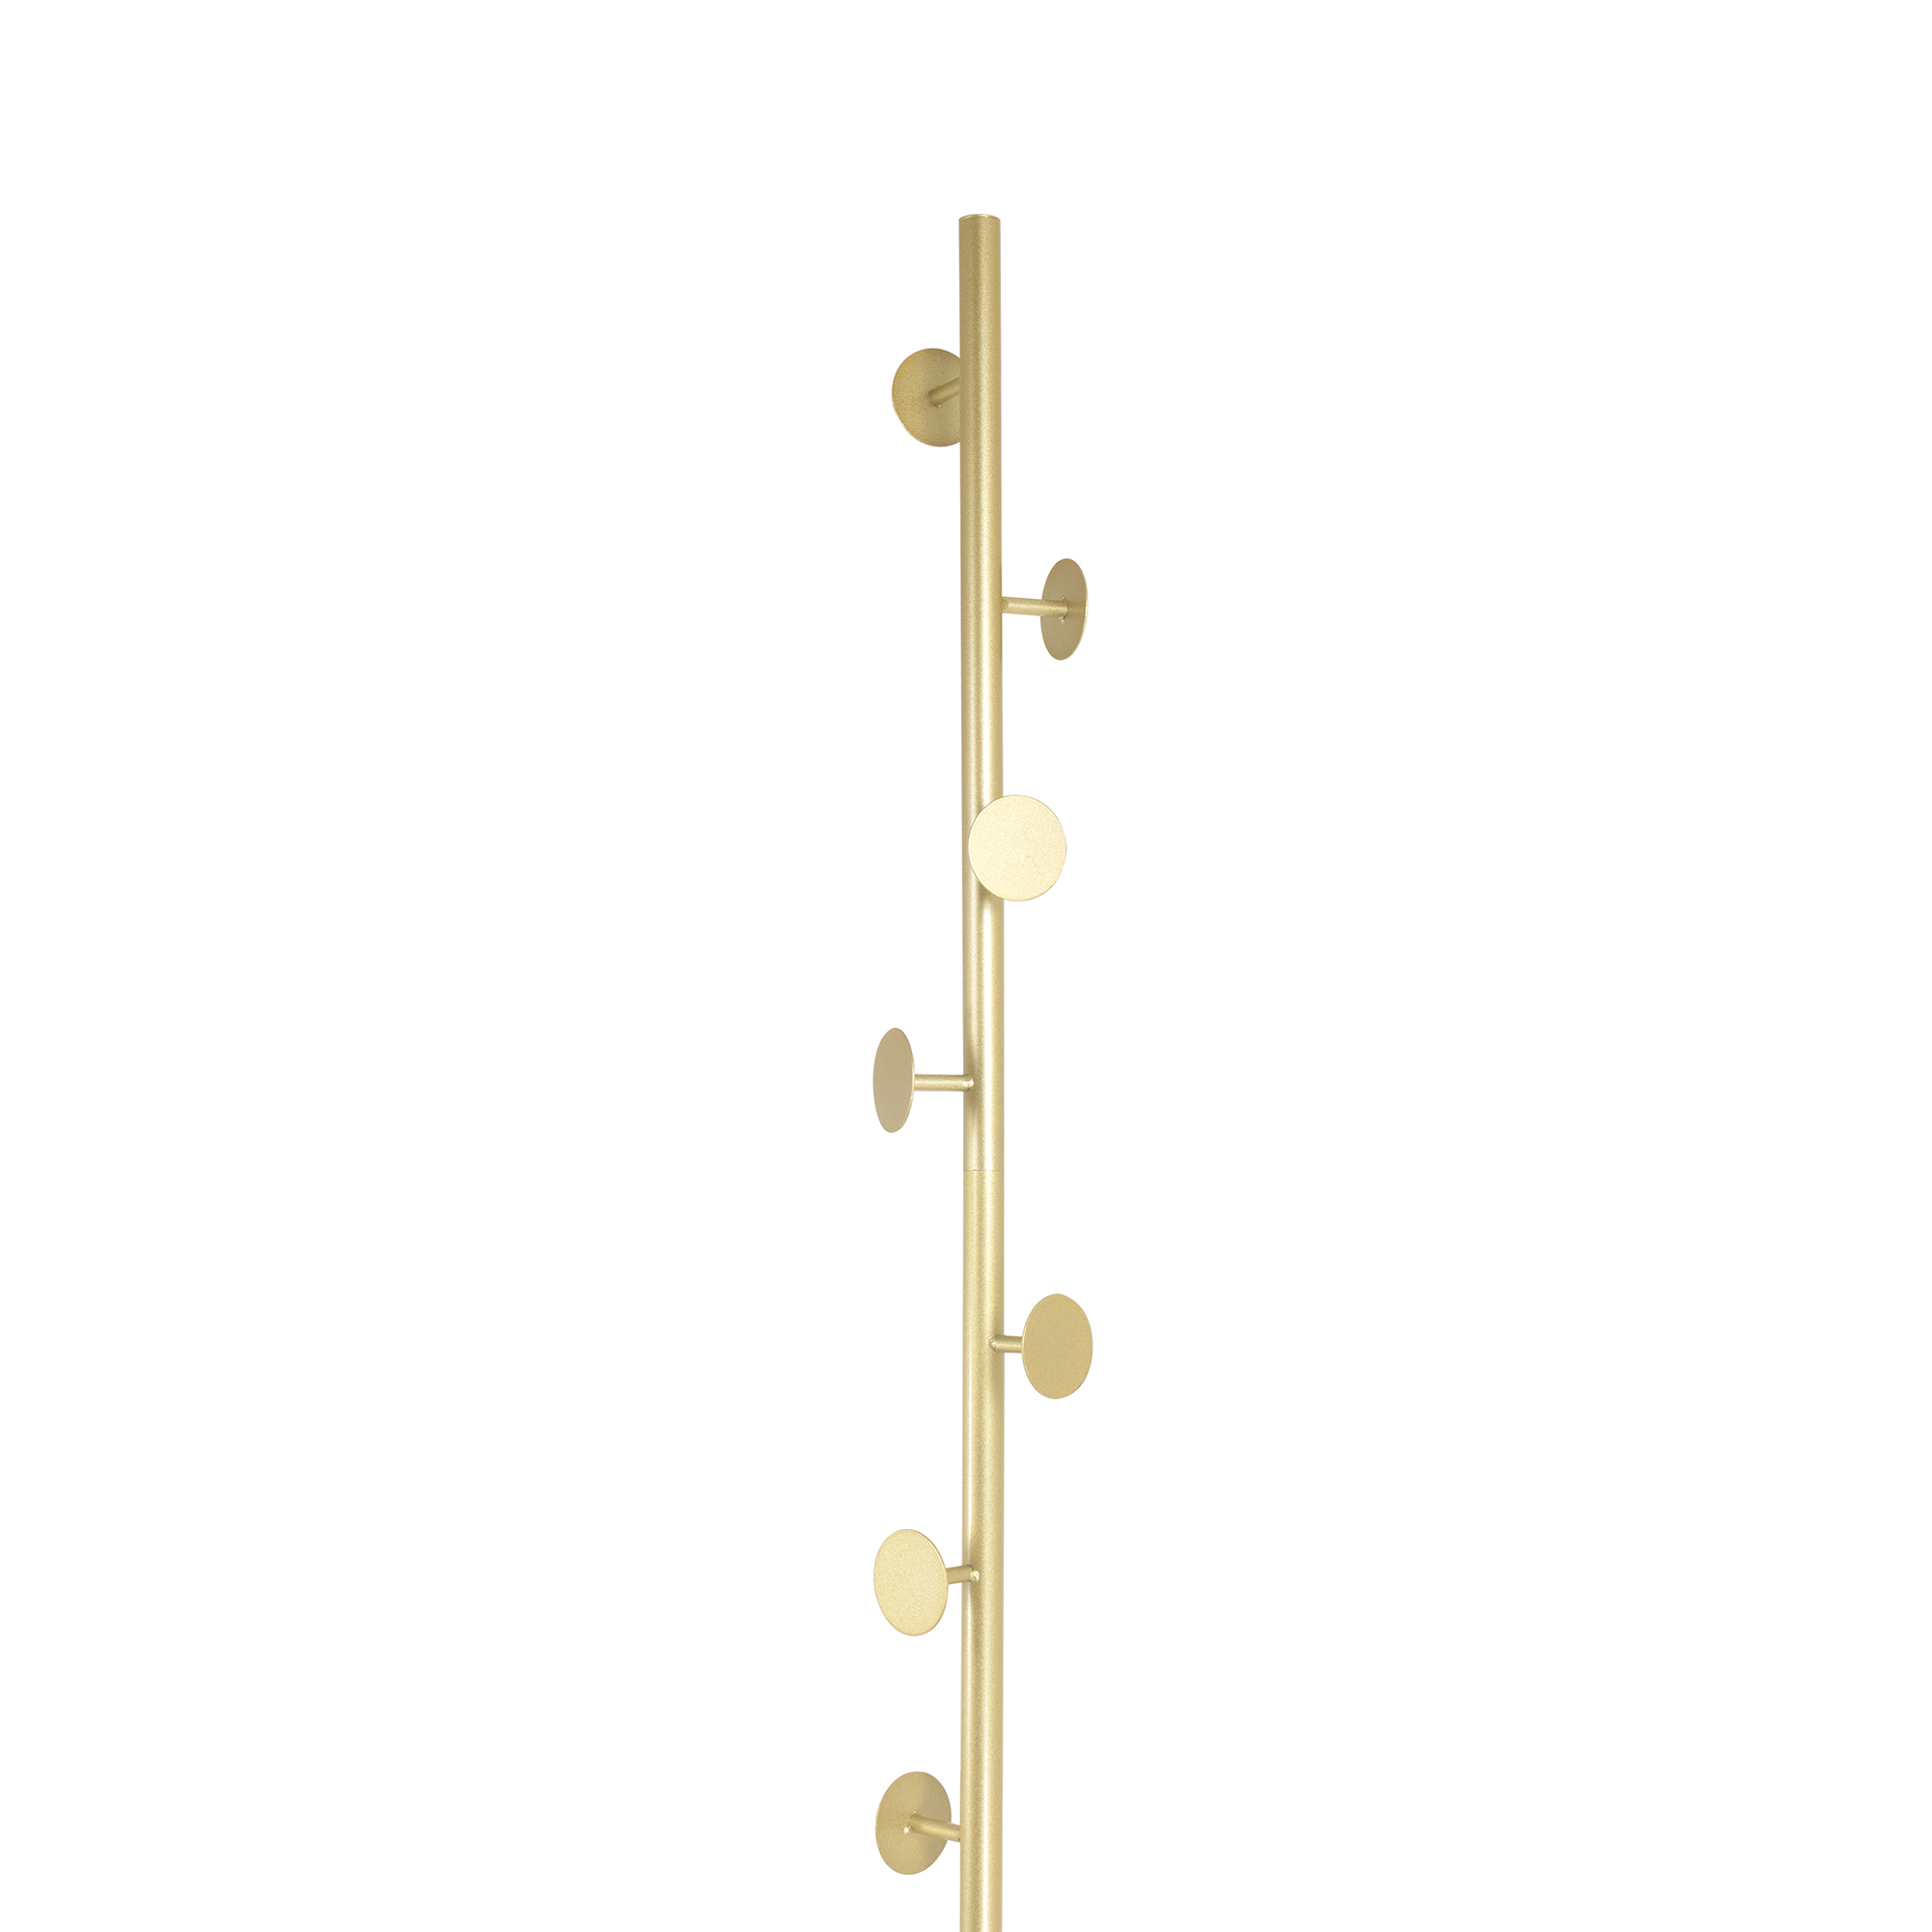 Free Standing Metal Coat Rack with Faux Marble Base